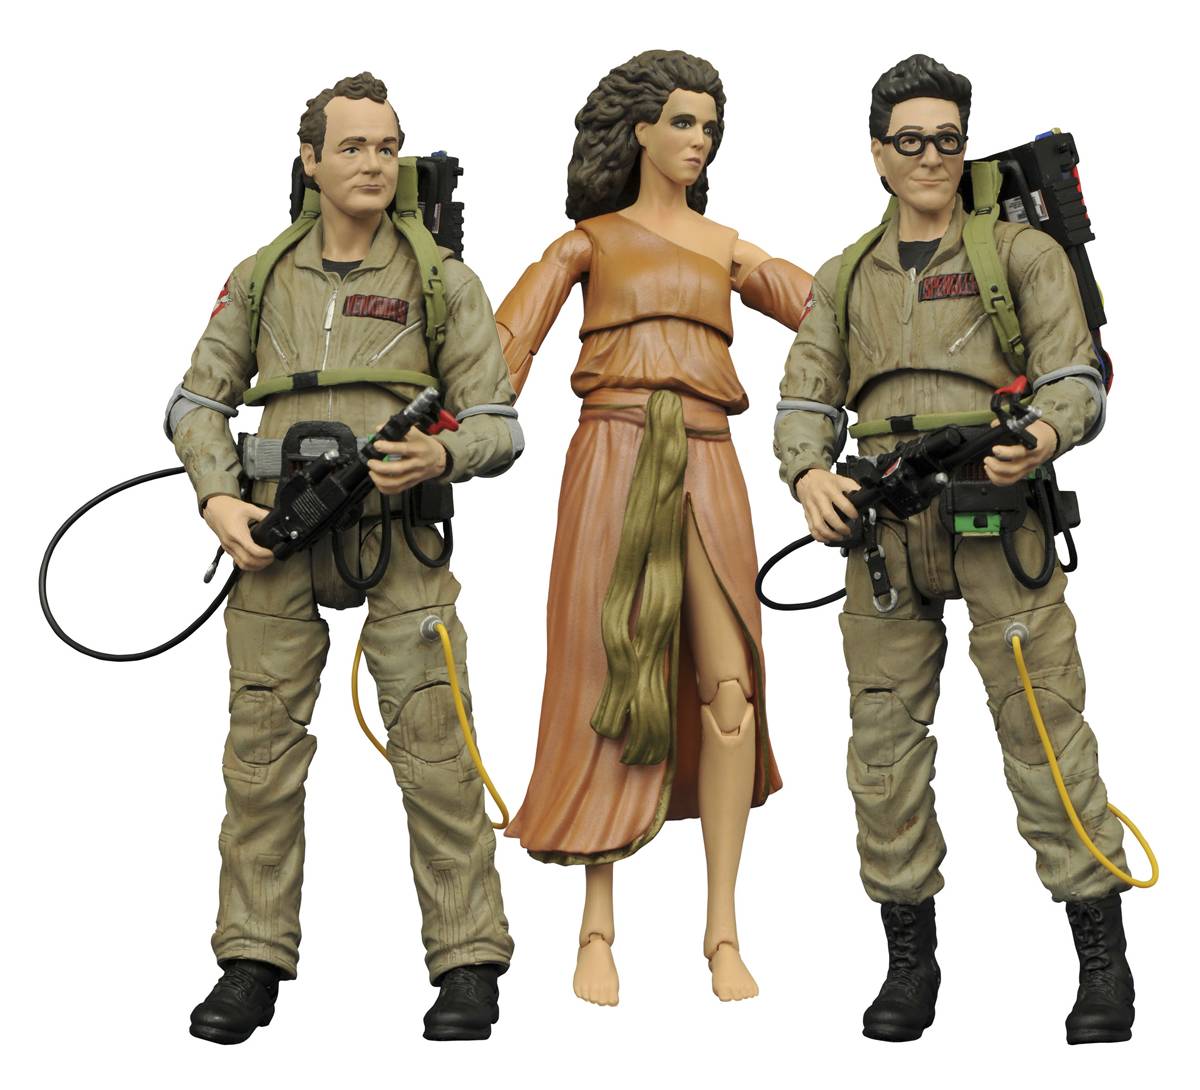 These Ghostbusters Action Figure Sets Go Together Like the ...
 Ghostbusters Toy